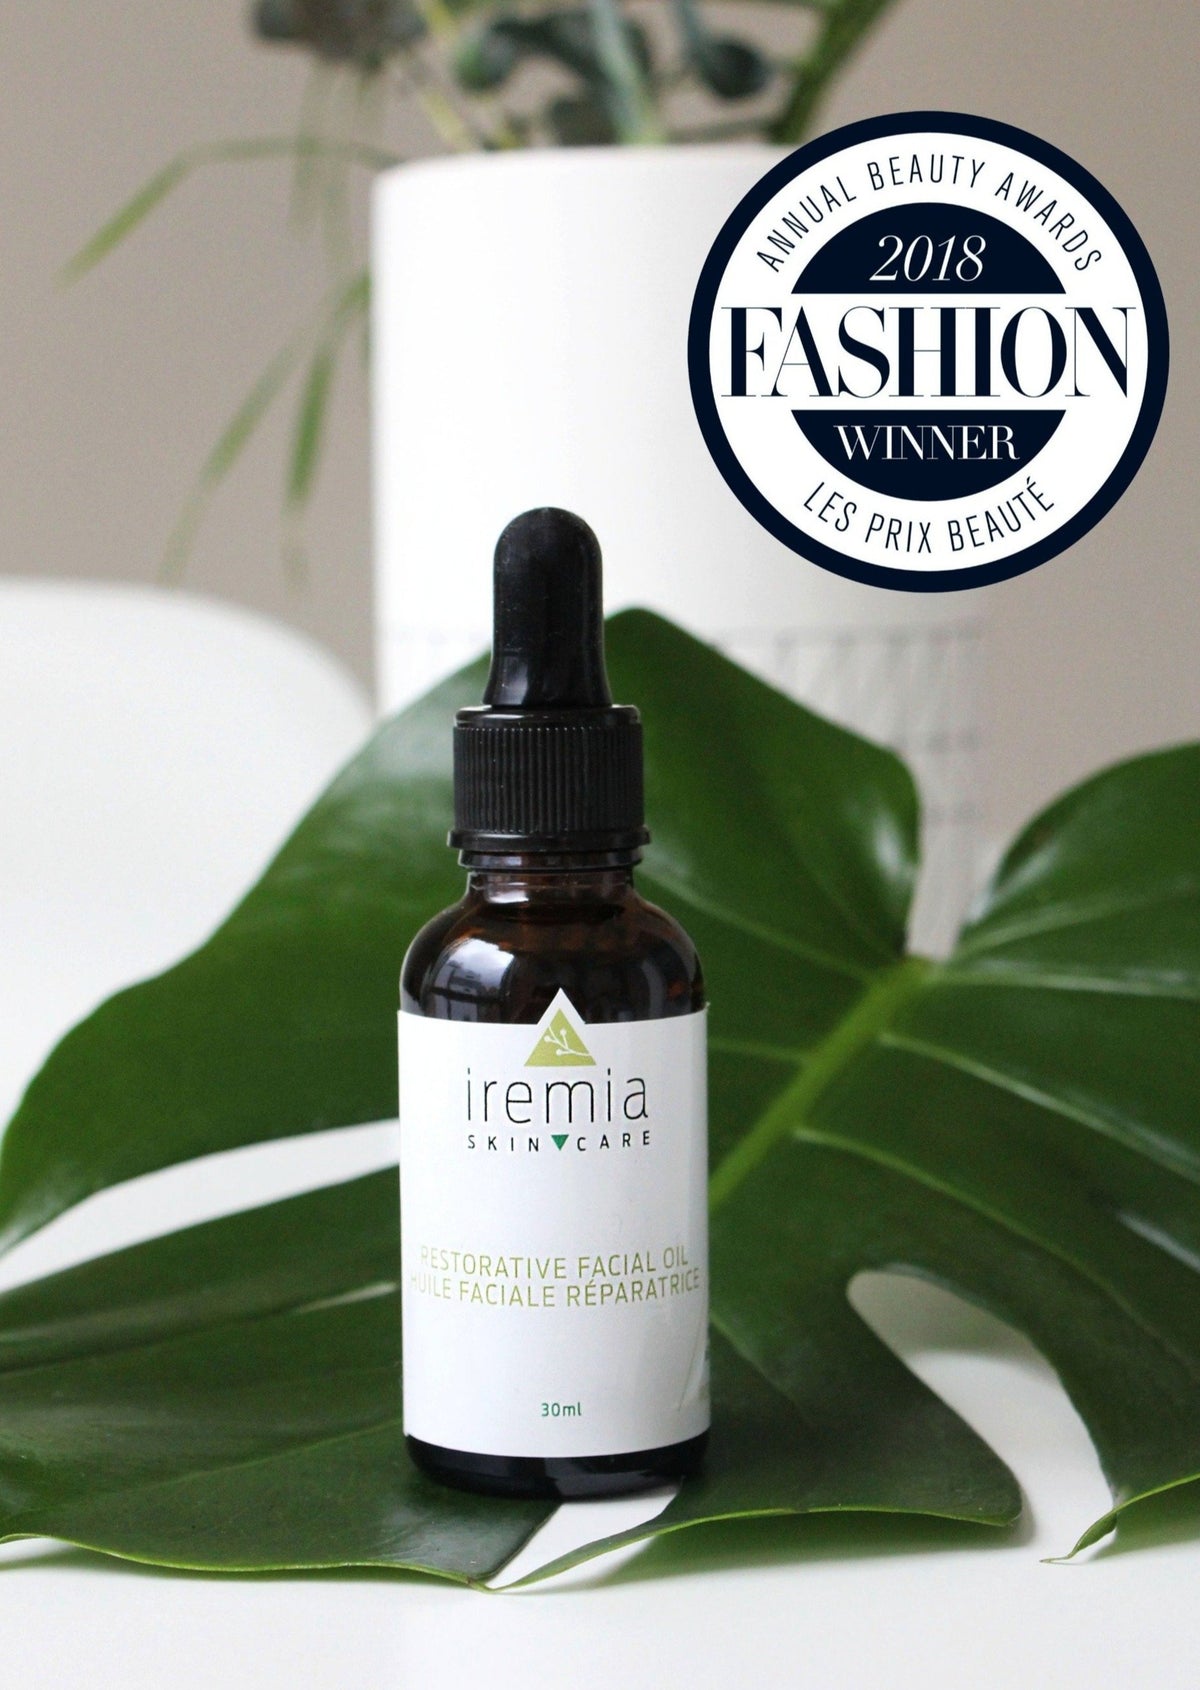 FASHION Magazine&#39;s Best Facial Oil. A beautiful blend of 11 botanical oils, including Argan, Rosehip and Sea Buckthorn oil. Packed with Omega-3, 6 and 9 fatty acids, this award-winning facial oil helps rejuvenate your skin and improves skin tone, elasticity and overall hydration.